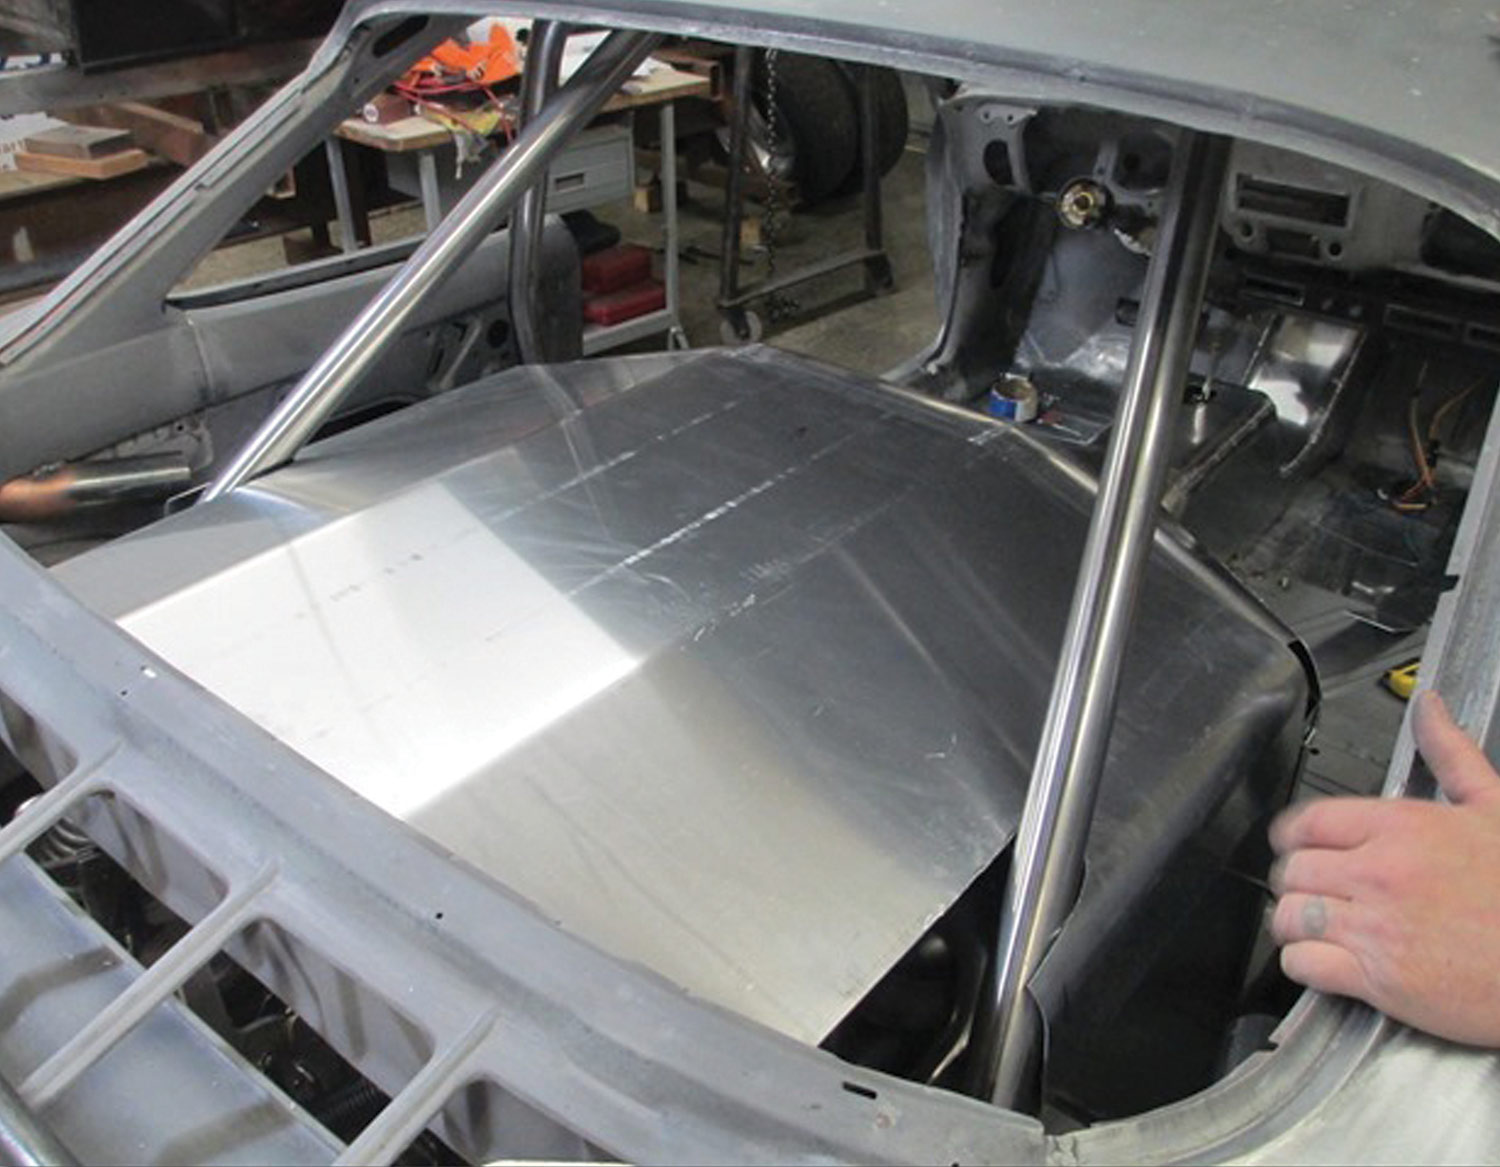 the rear braces for the rollbar can be seen